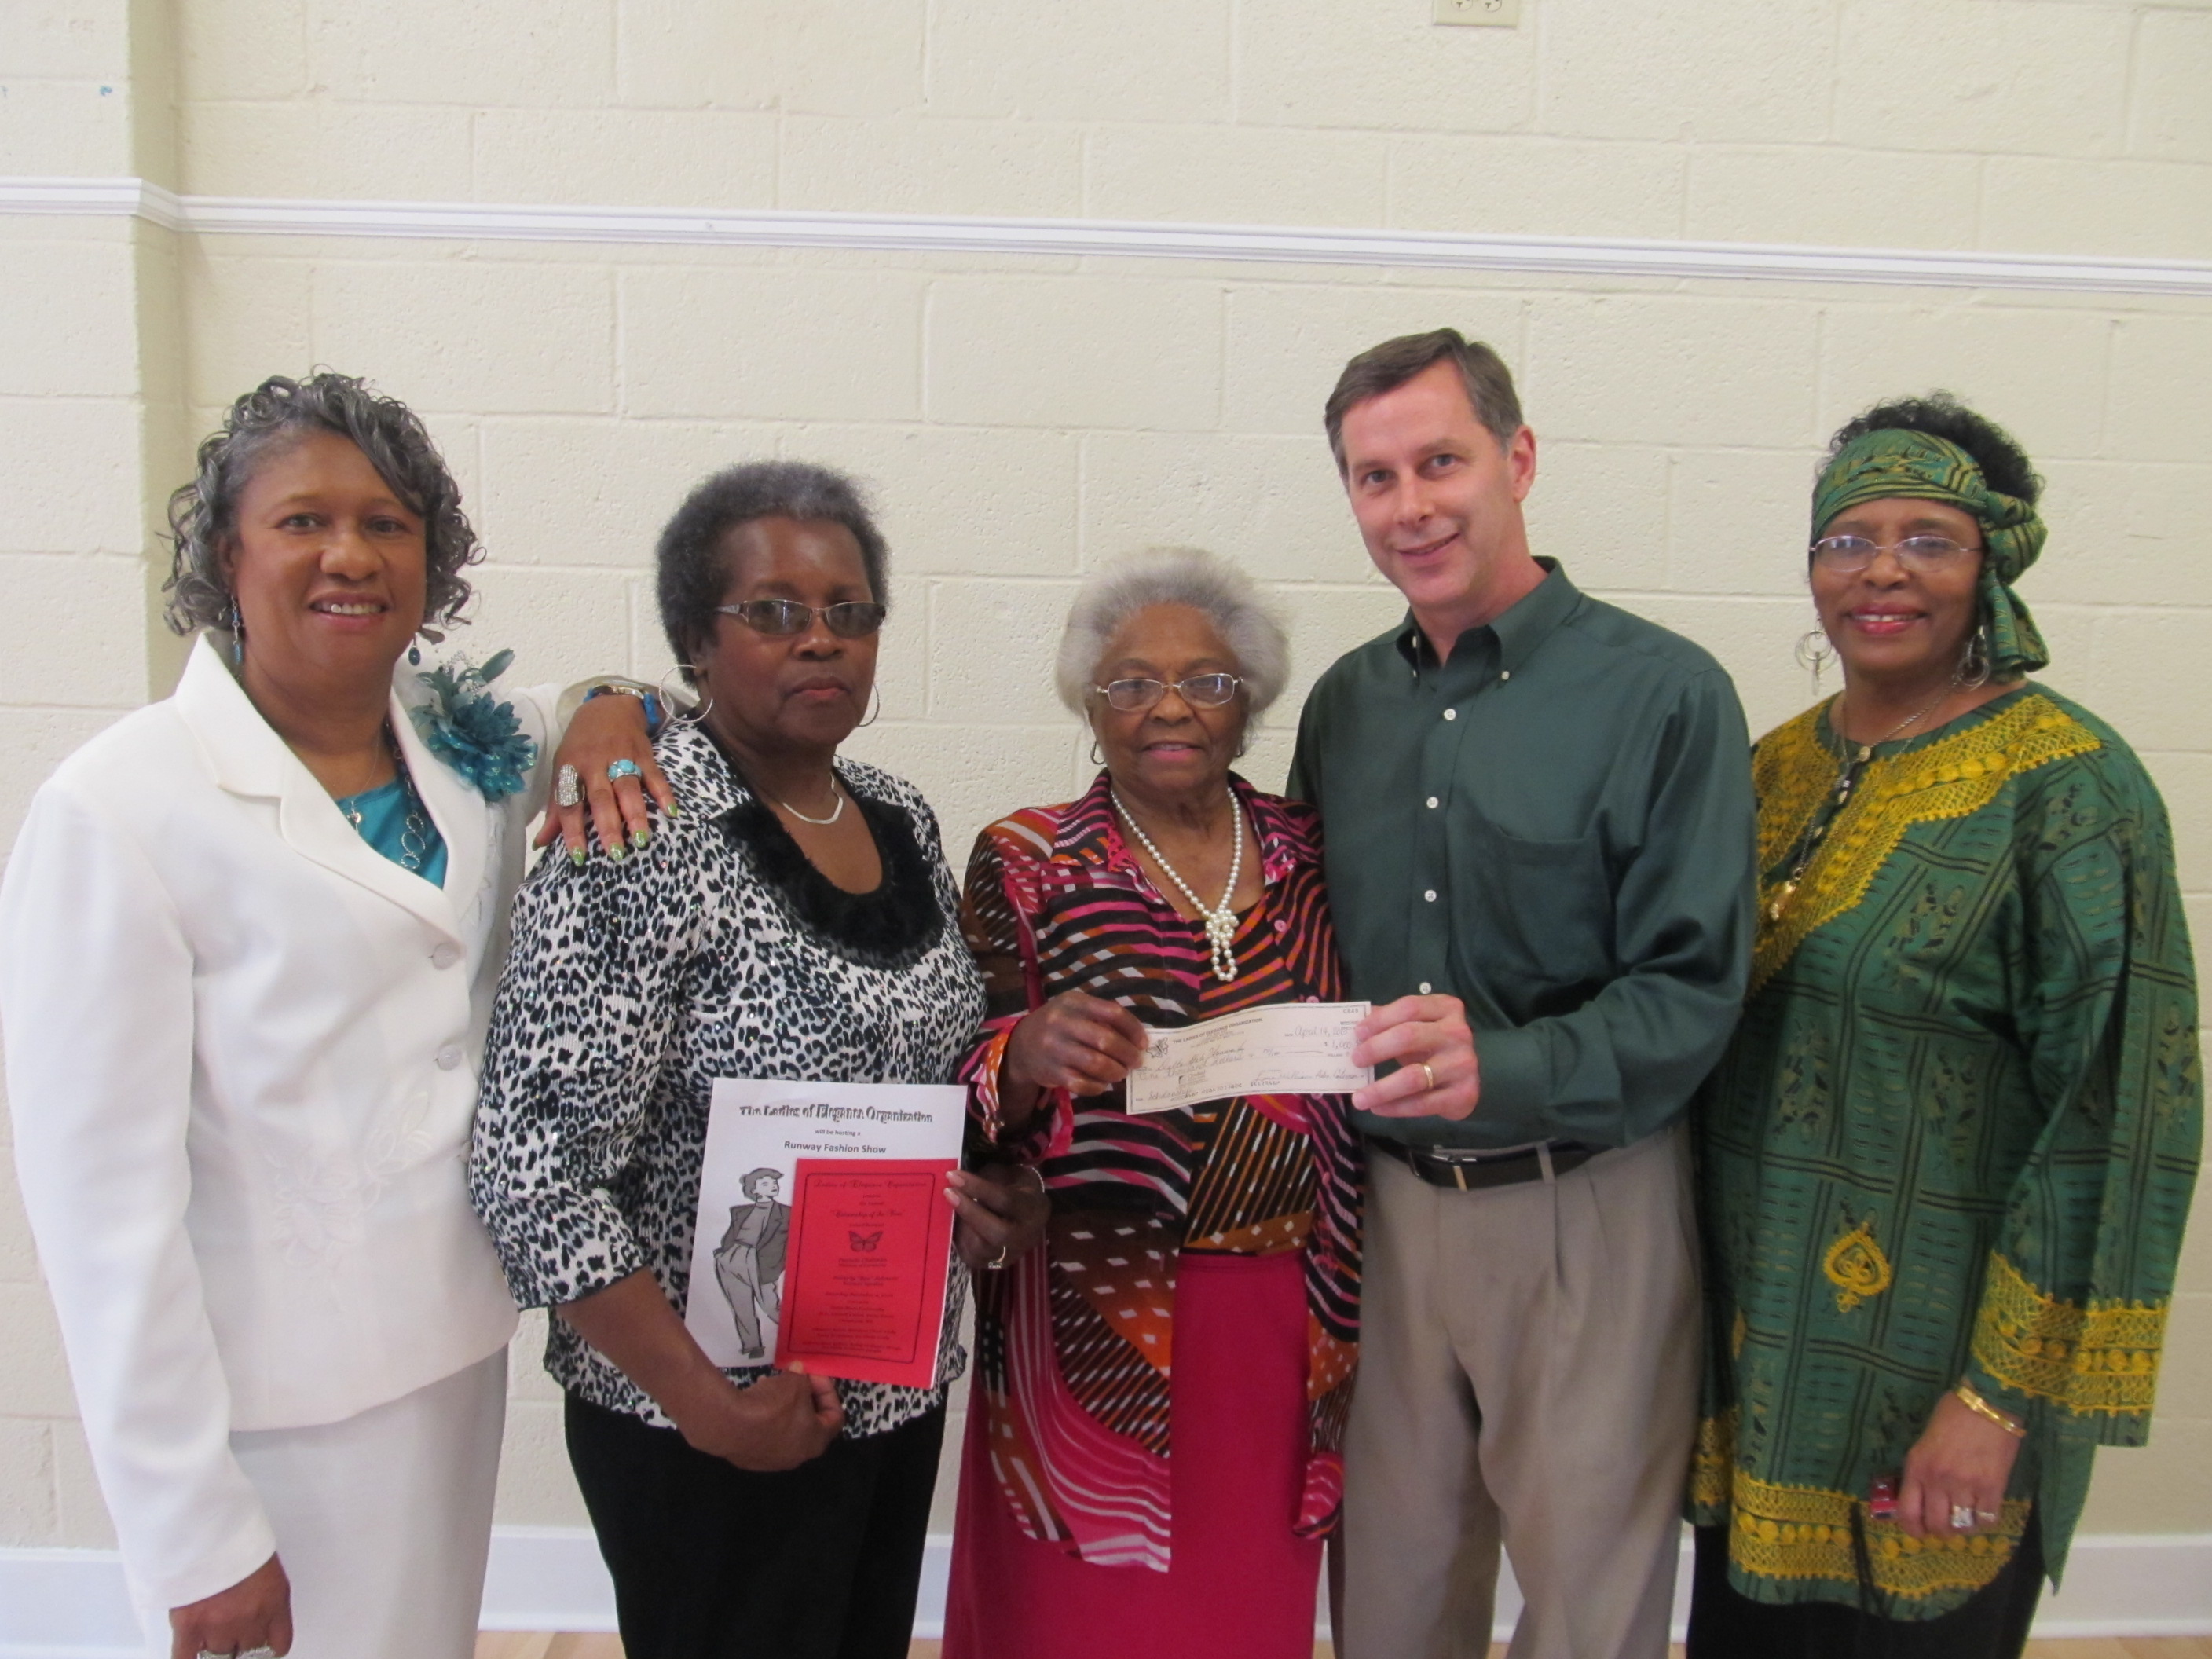 Photo: Lady Helen Coleman (center), Founder and CEO of the Ladies of Elegance Organization (LEO), presents a $1,000 check for the newly initiated Ladies of Elegance Annual Scholarship to Keith Fulcher, Executive Director of Alumni-Foundation at Delta State University.   